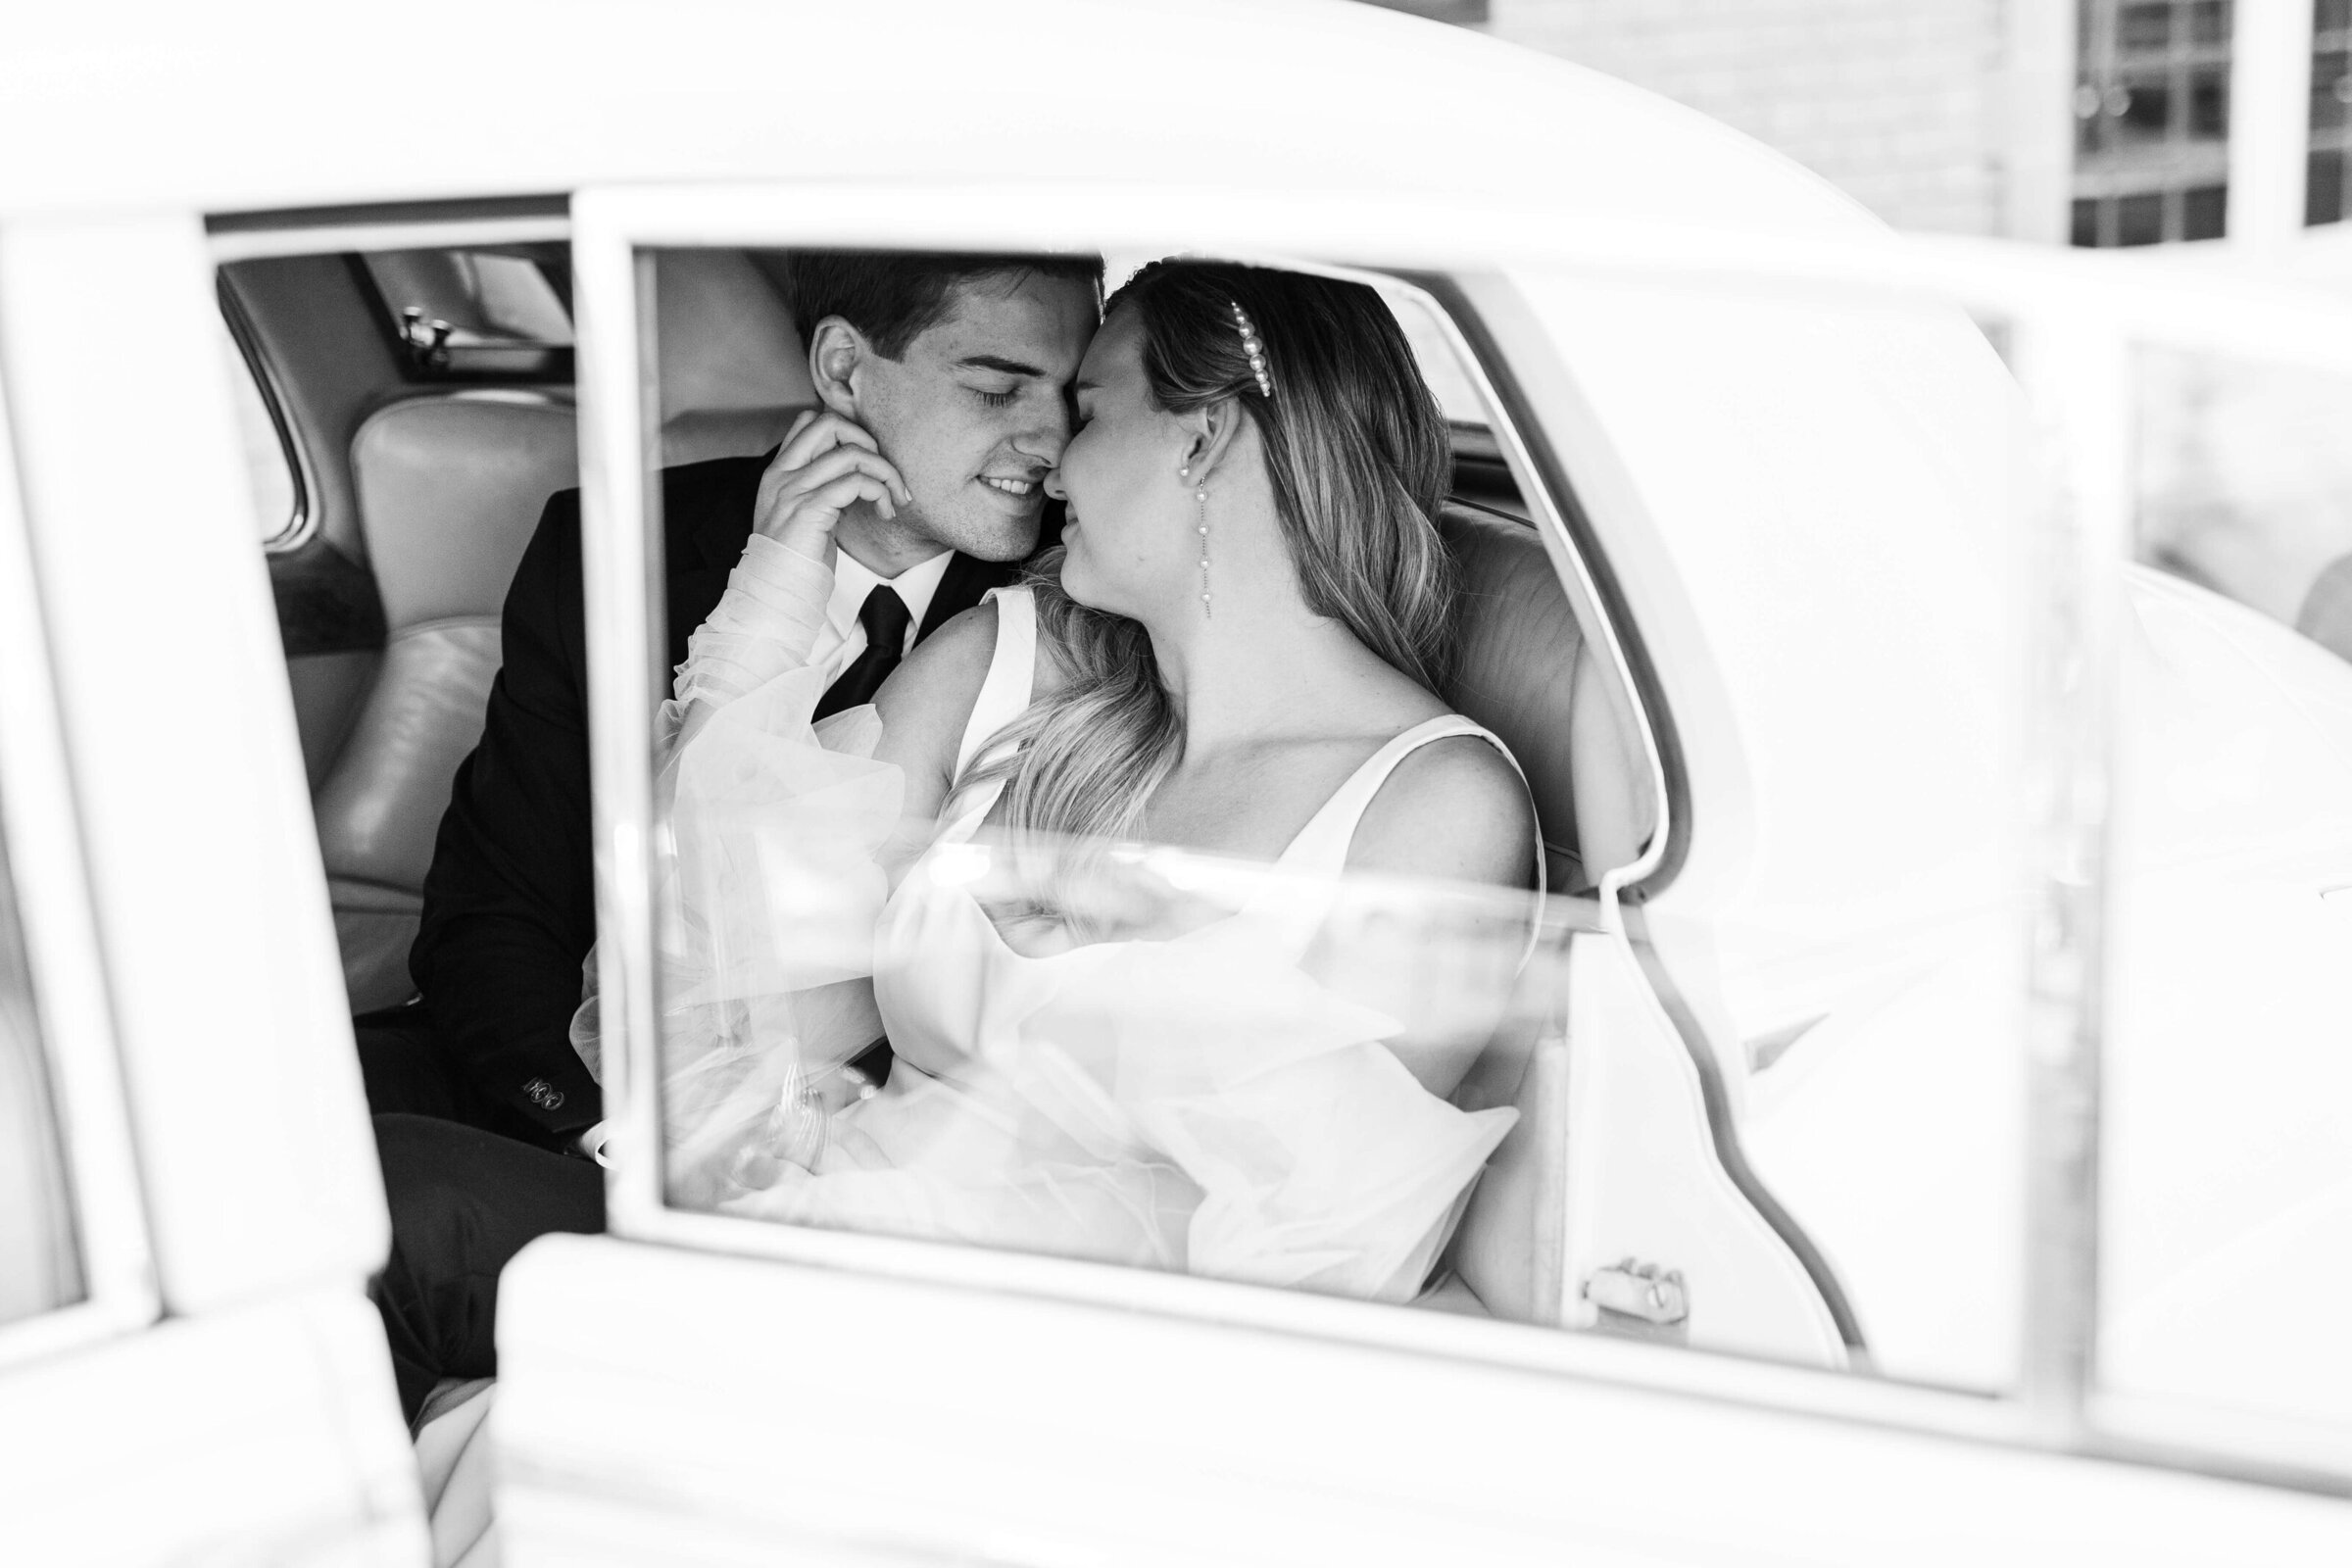 A groom and bride sit in the backseat of a Rolls Royce about to kiss. It's a black and white image taken by a cincinnati wedding photographer.